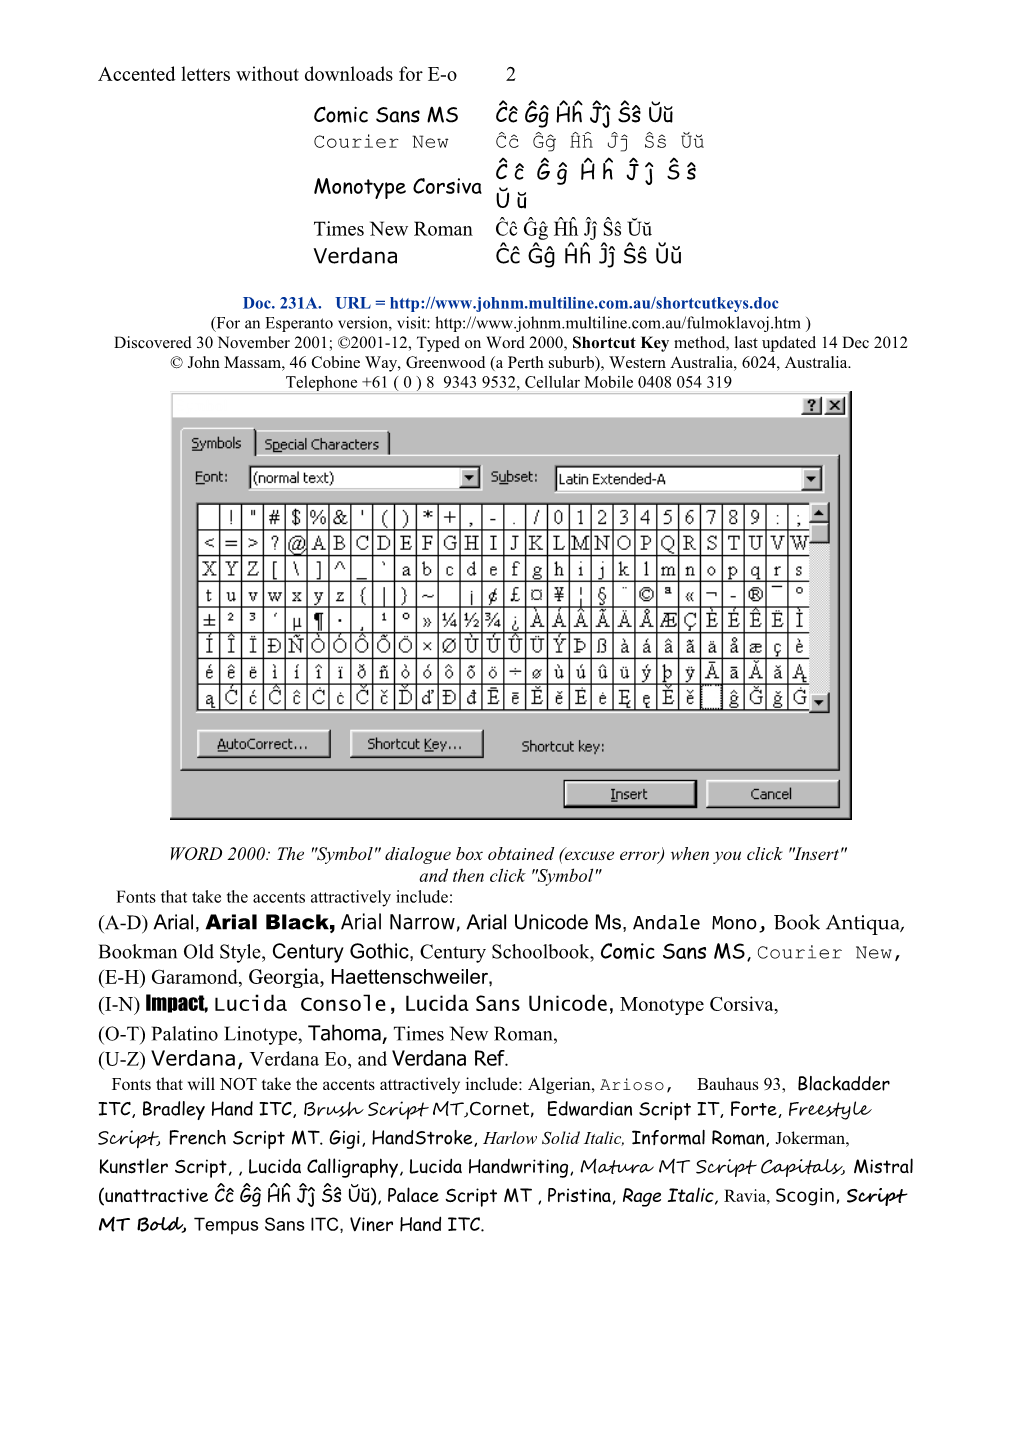 Esperanto's Aĉĉented Letters with Neither Font Nor Programme Downloading, Using Word 2000